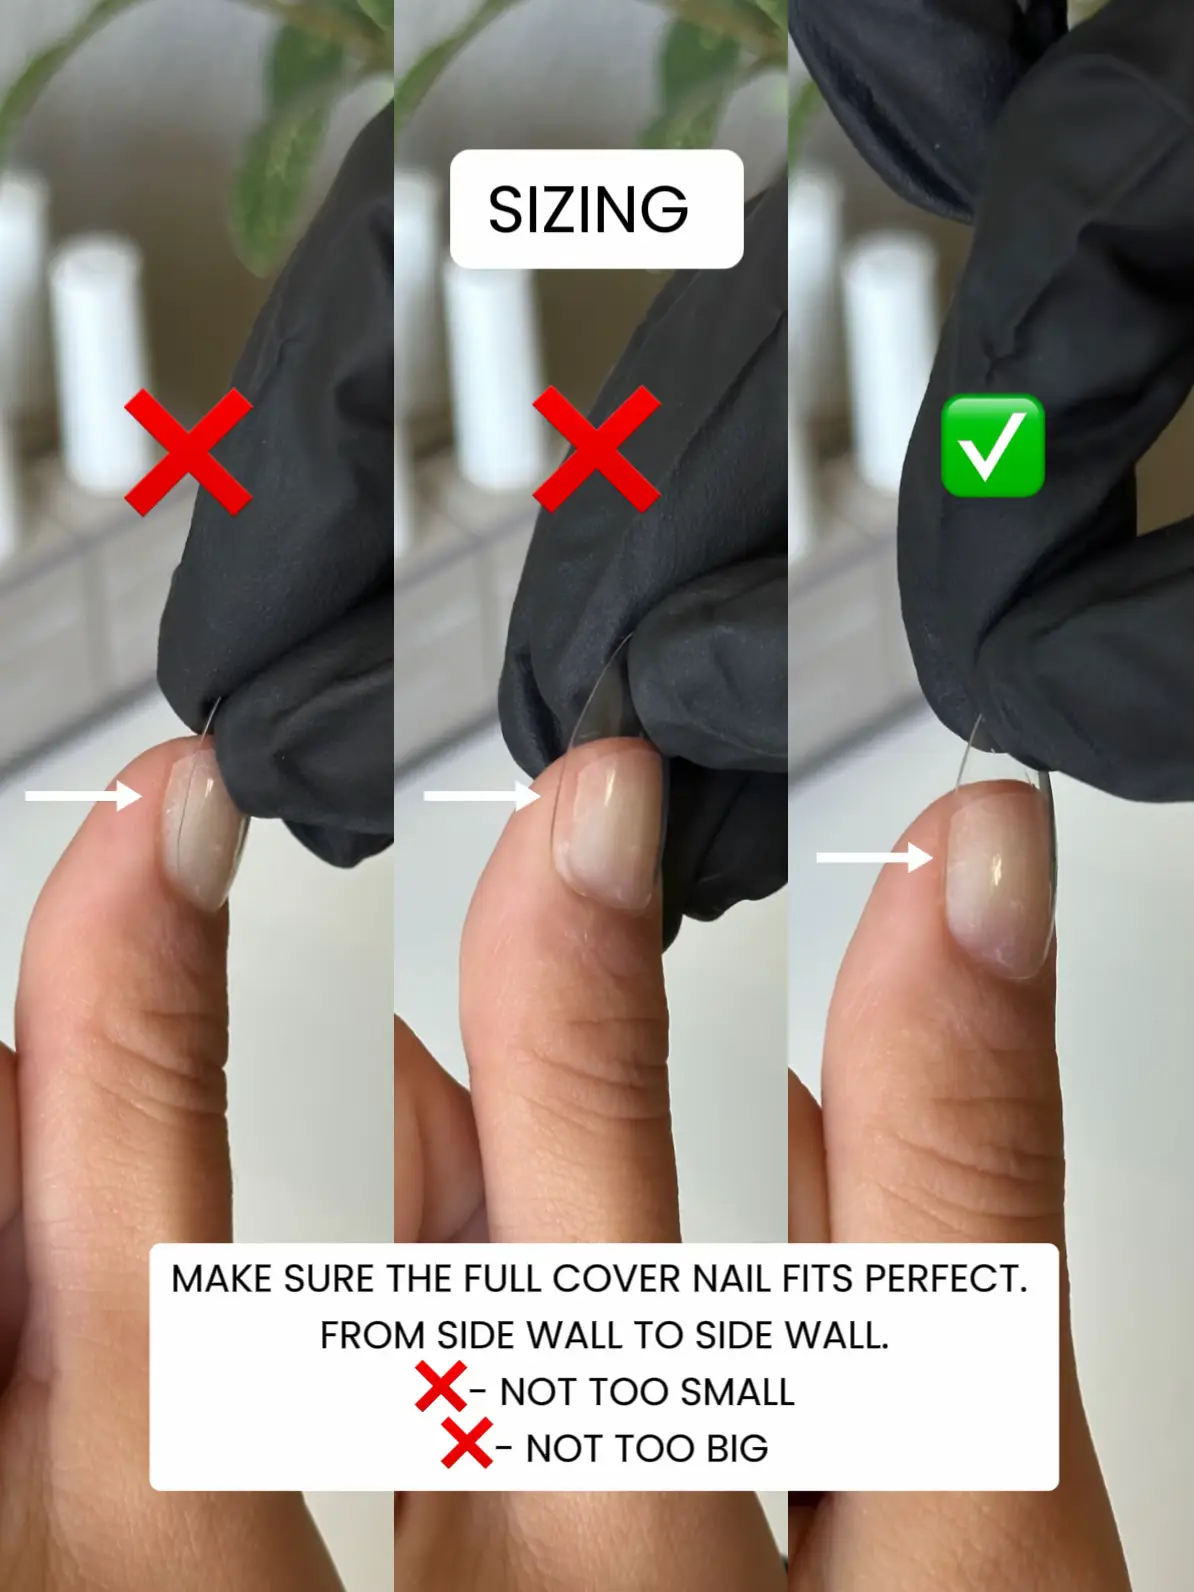 Villa Nail Salon on X: Thicker isn't always better, especially when it  comes to acrylic nails! 🙅‍♀️ Don't fret if your nails are too thick –  there's a fix for that! Dive